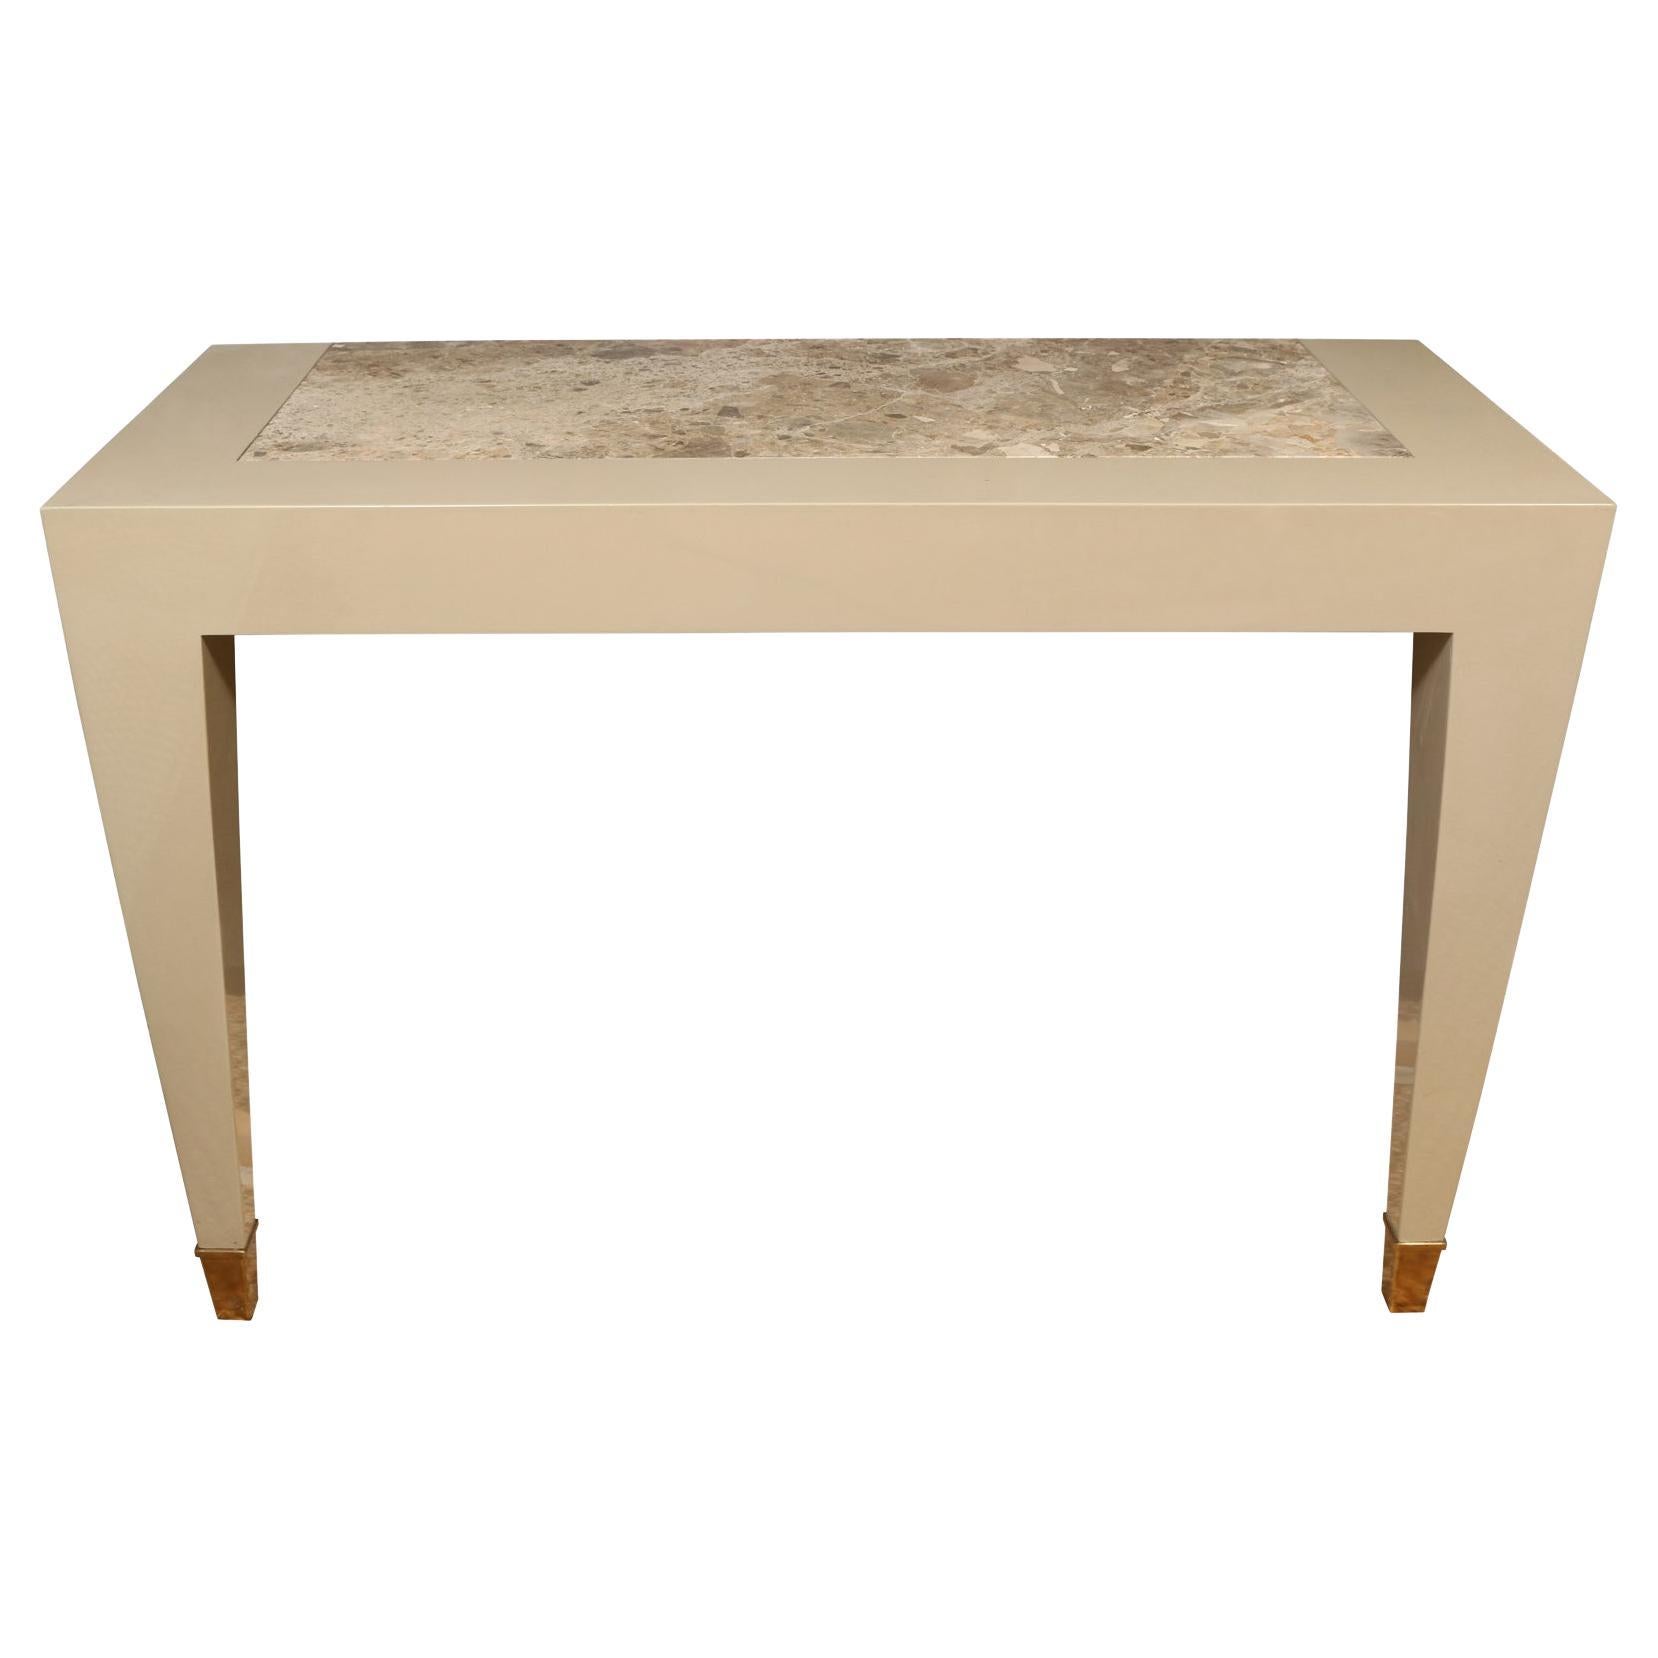 Donghia Lacquered Wall Console with Marble Inset Top